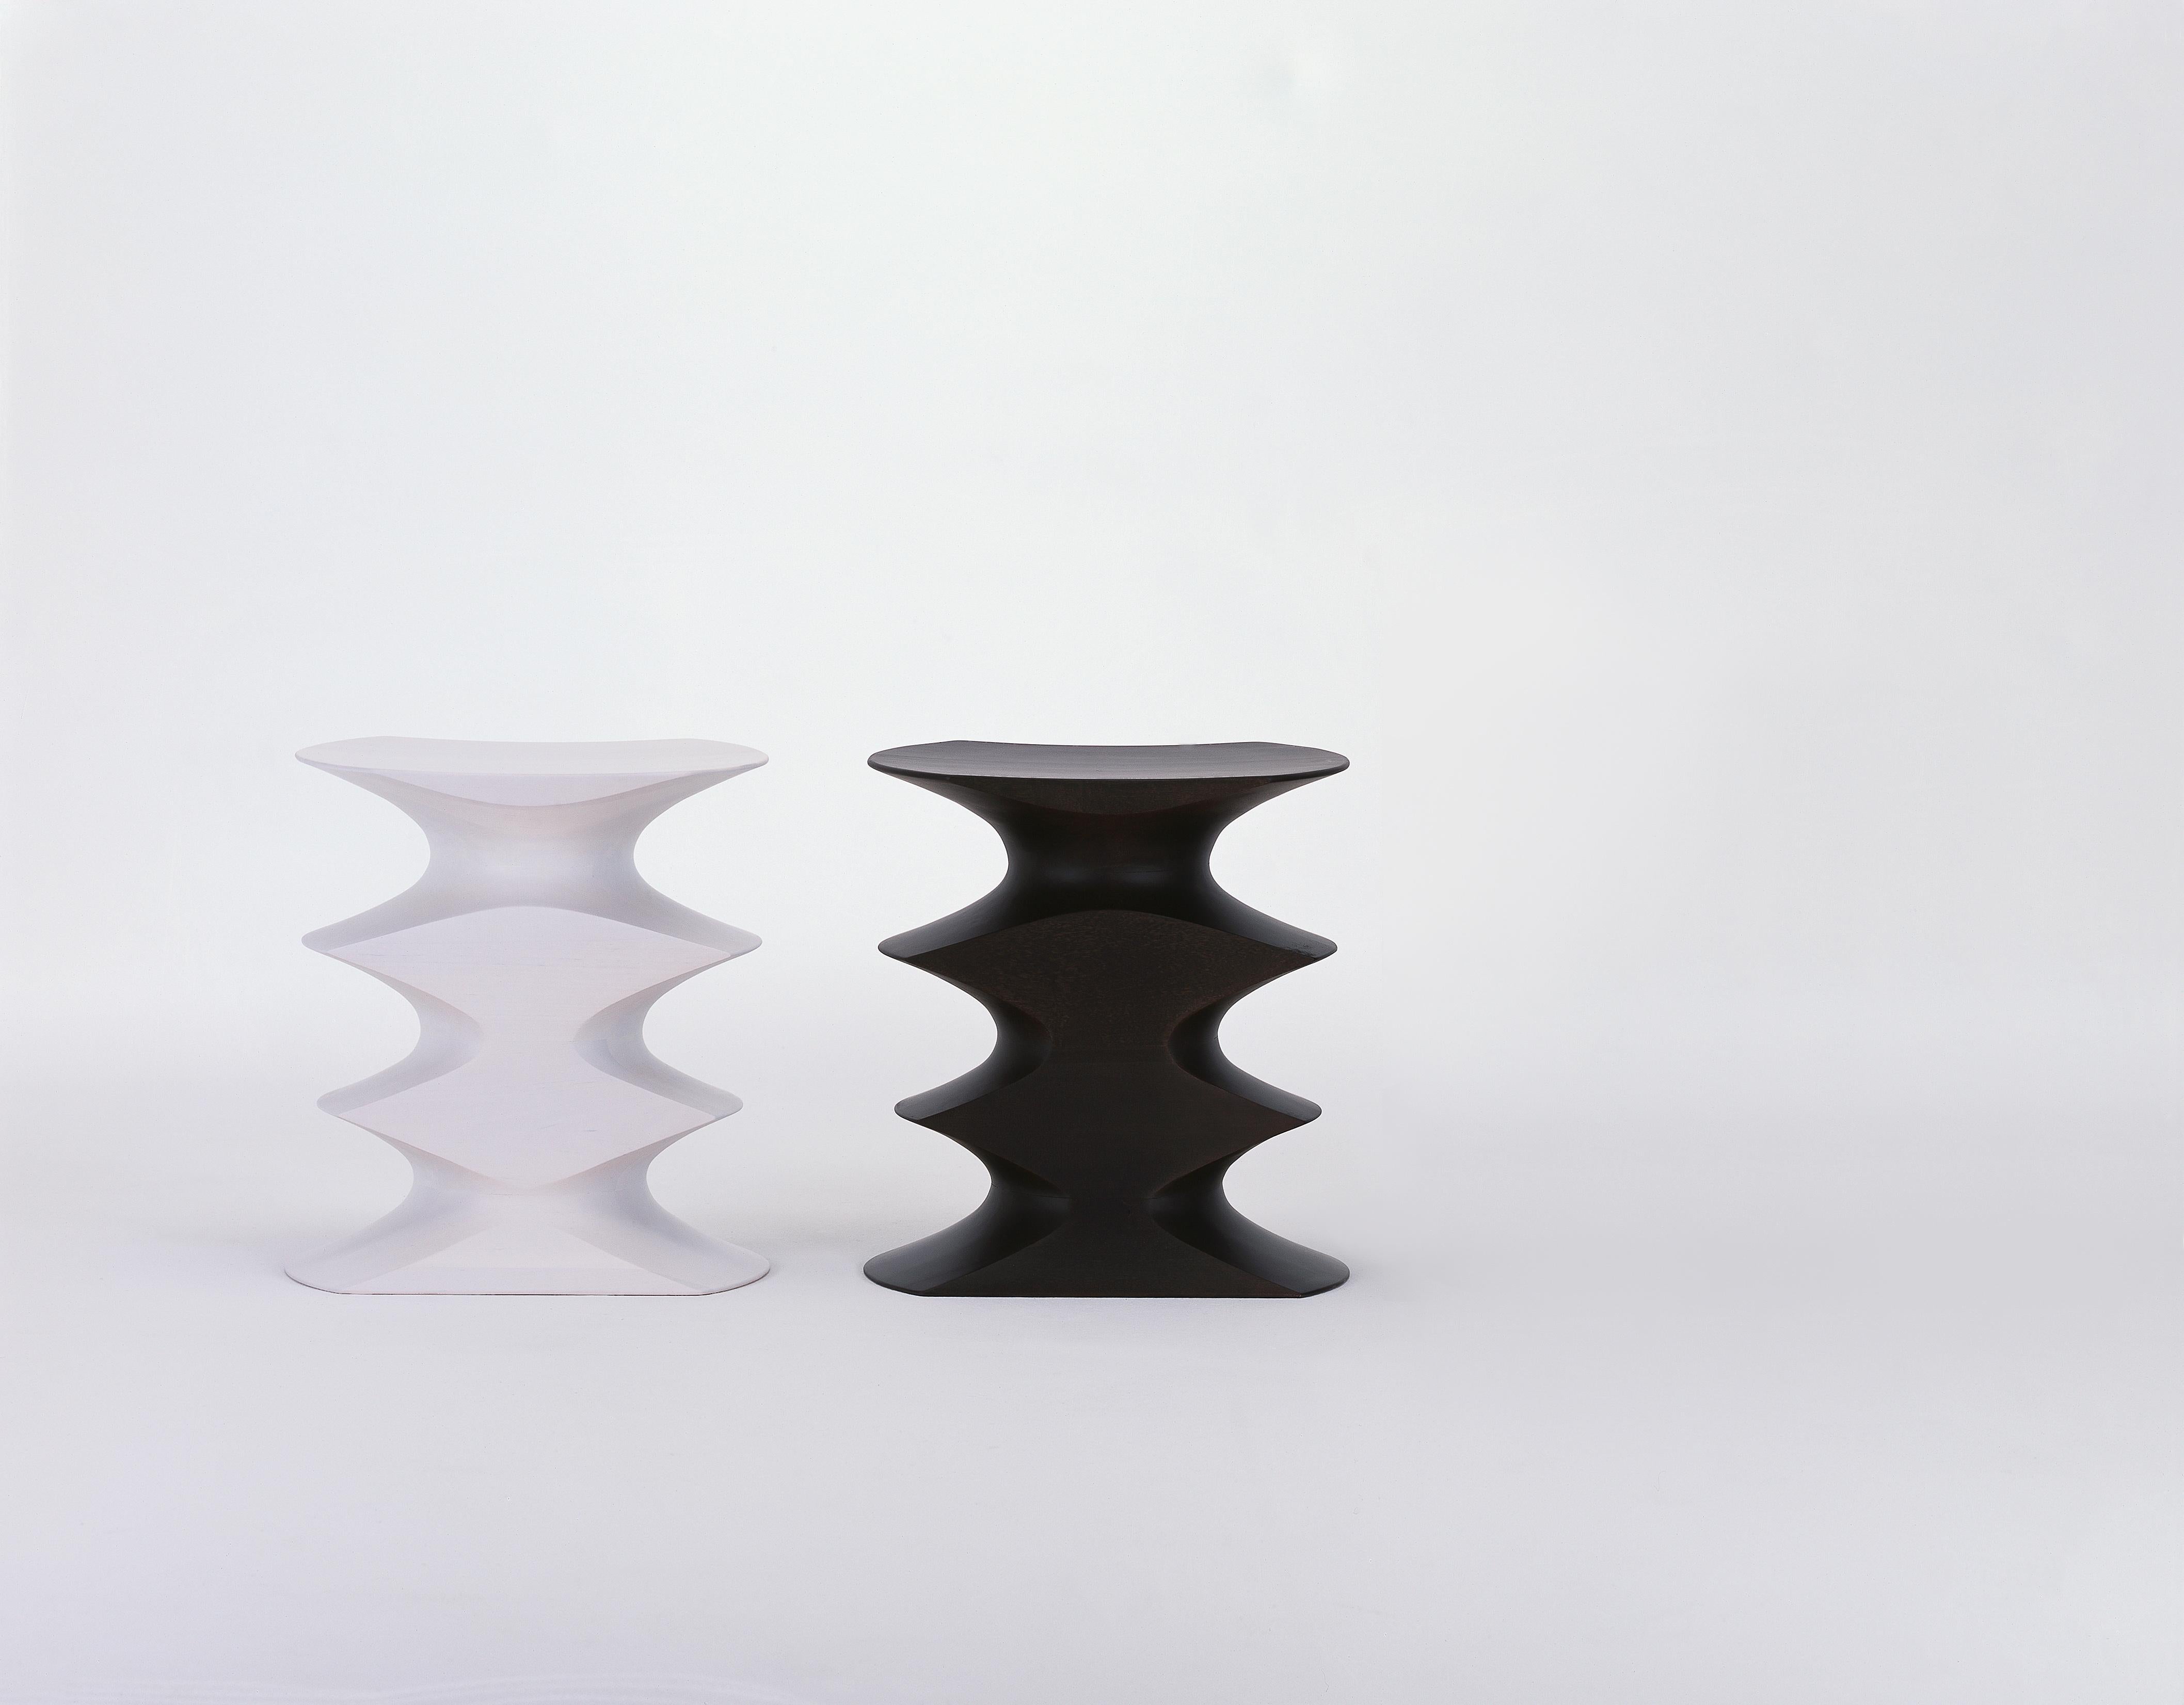 These items are only available in the United States. 

With its intuitively clear shape, Hocker represents fundamental aspects of the conceptual approach practiced by Herzog & de Meuron. The Hocker stool adds to a series of objects and